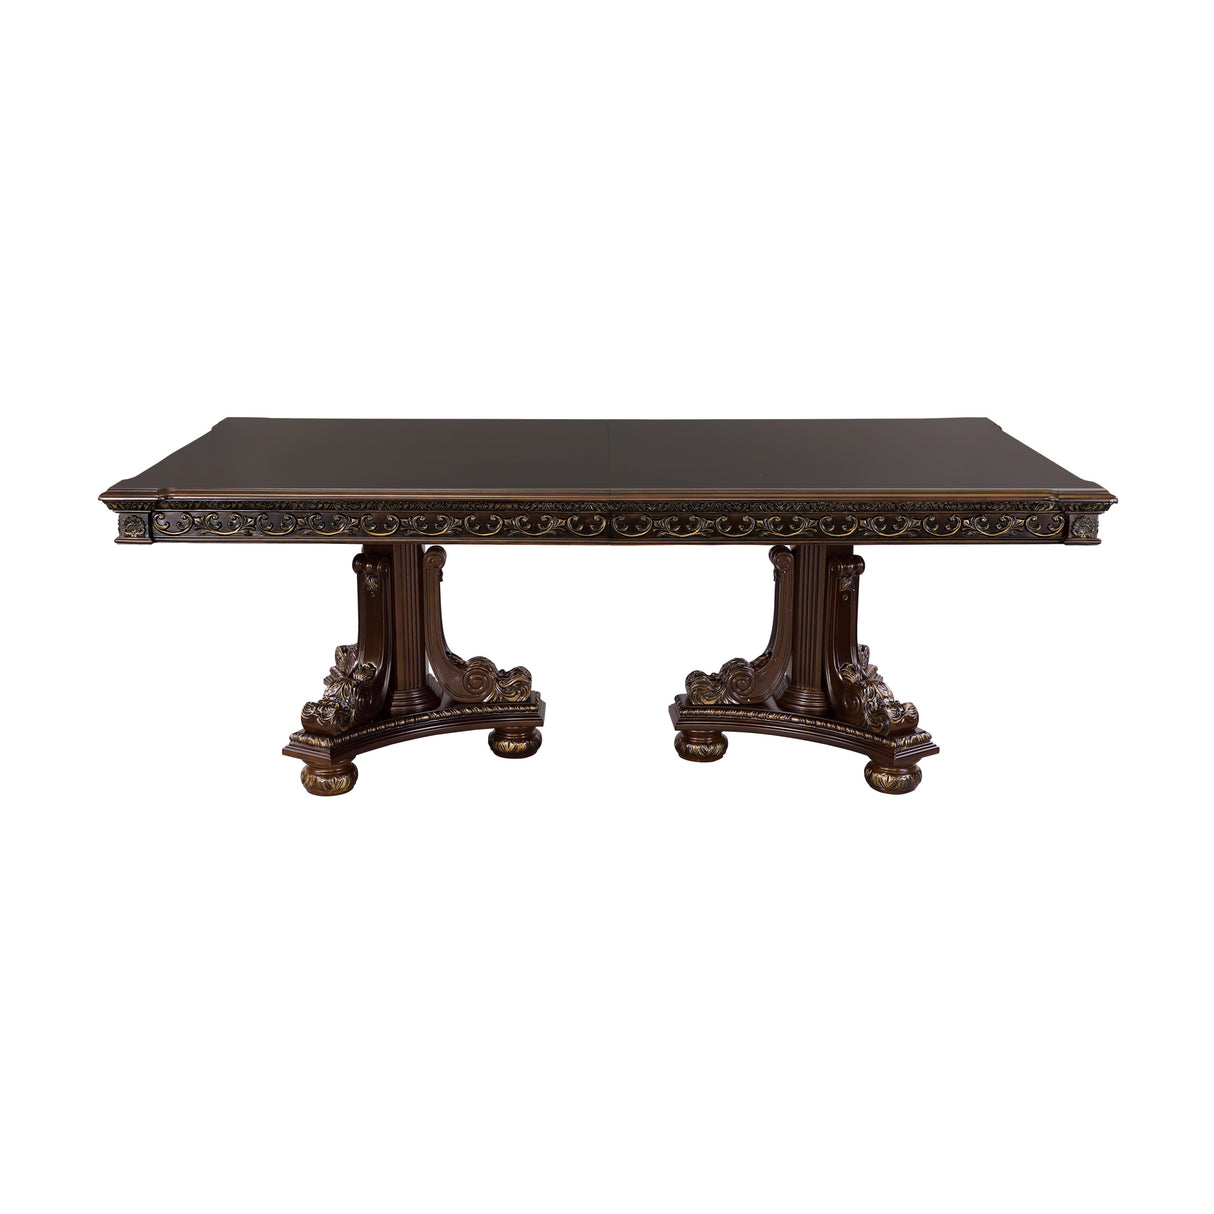 Formal Traditional Dining Table 1pc Dark Cherry Finish with Gold Tipping 2x Extension Leaves Cherry Veneer Wooden Dining Room Furniture - Home Elegance USA